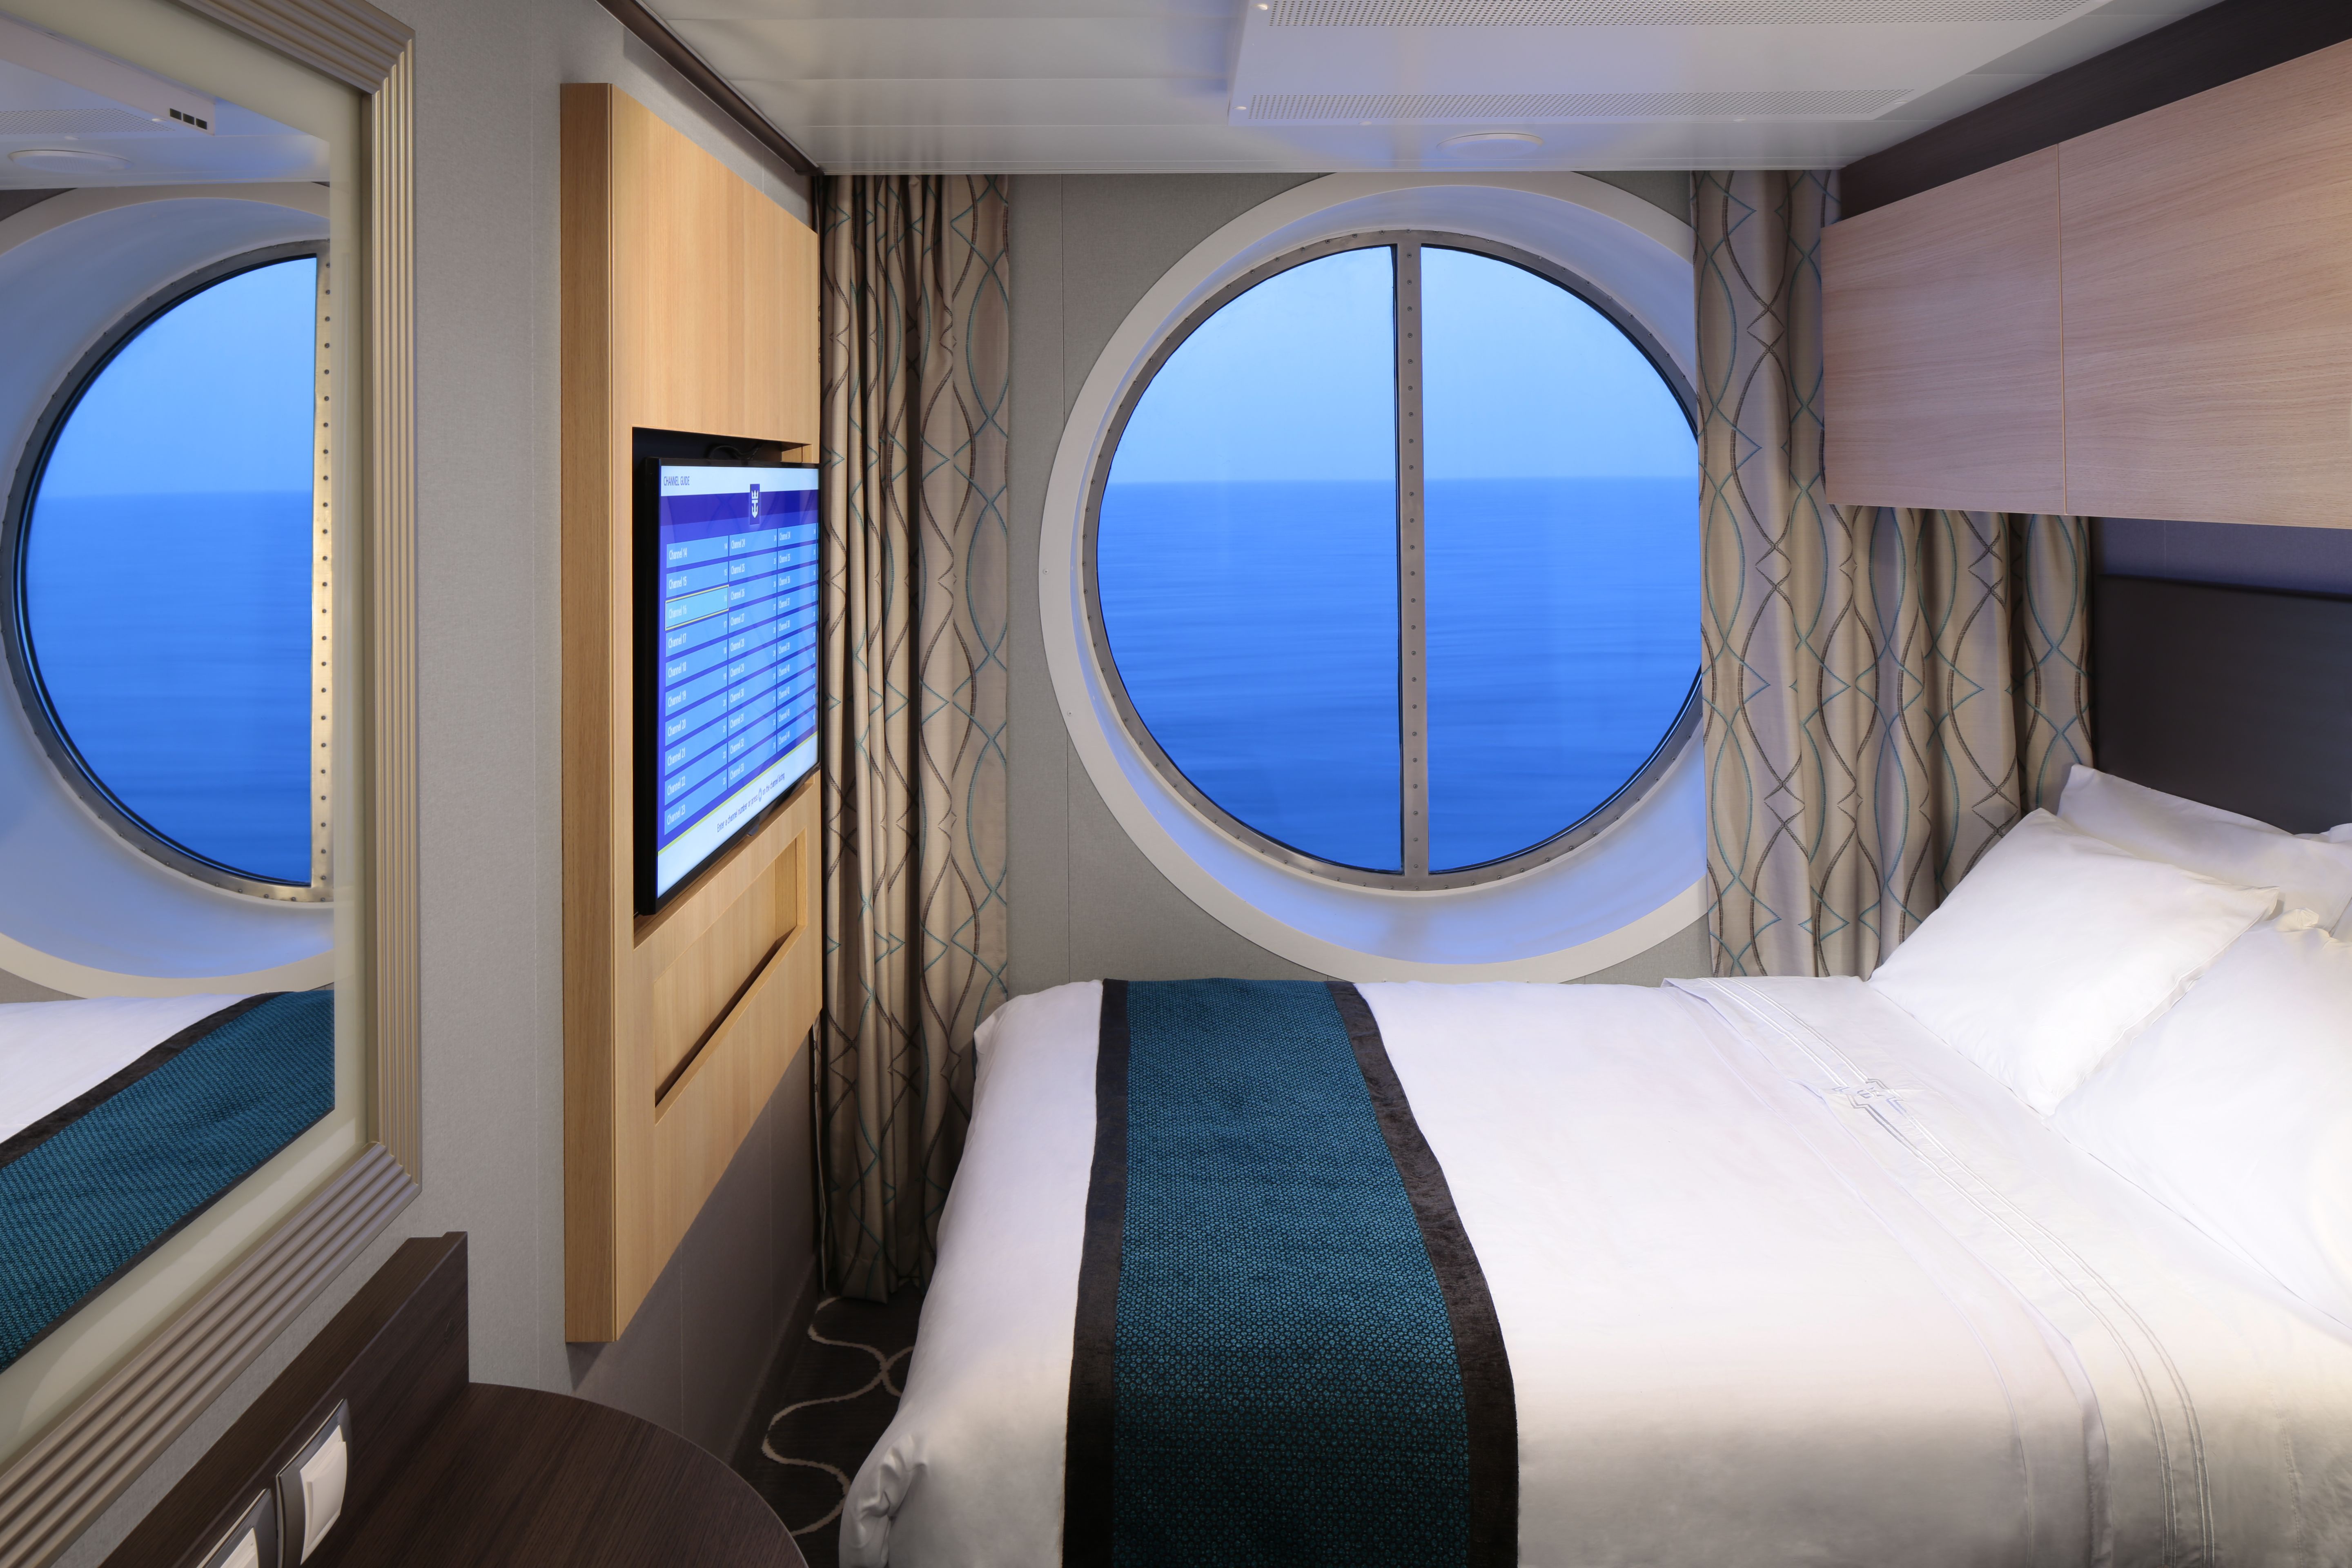 royal caribbean cruise room layout with pictures